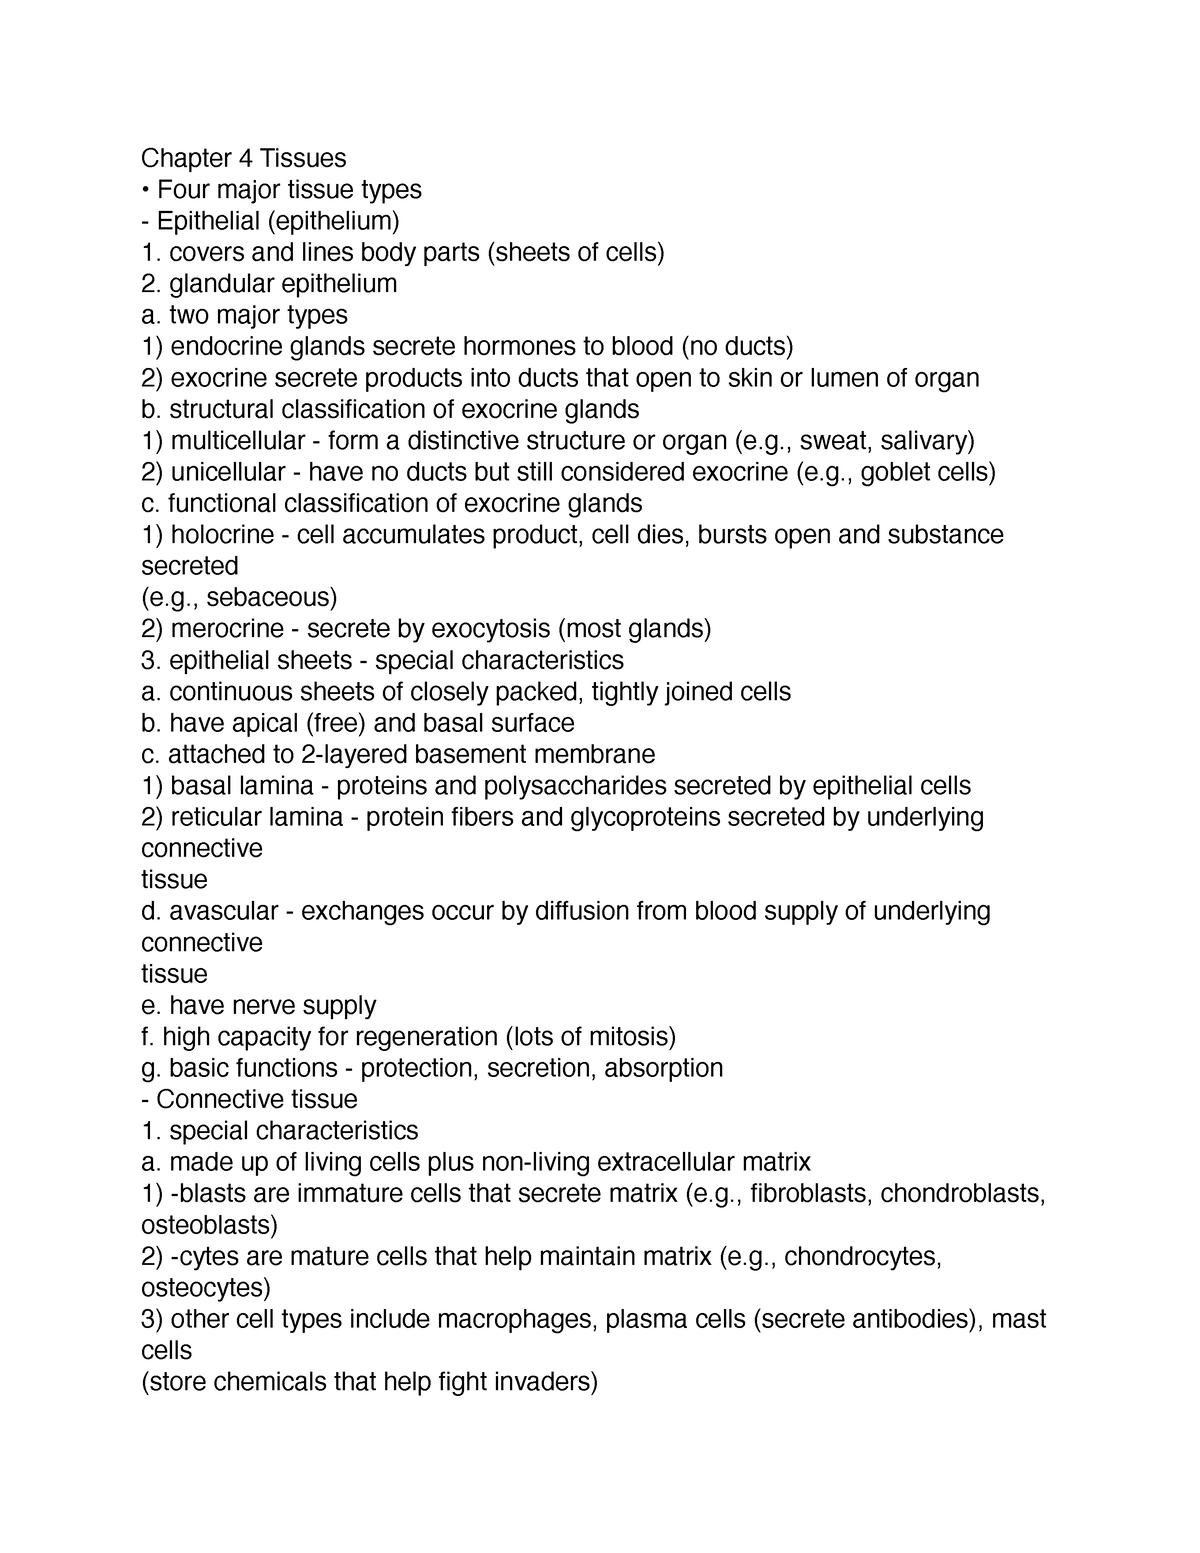 Anat 4:5 - tissues and cells anatomy class notes - Chapter 4 Tissues ...